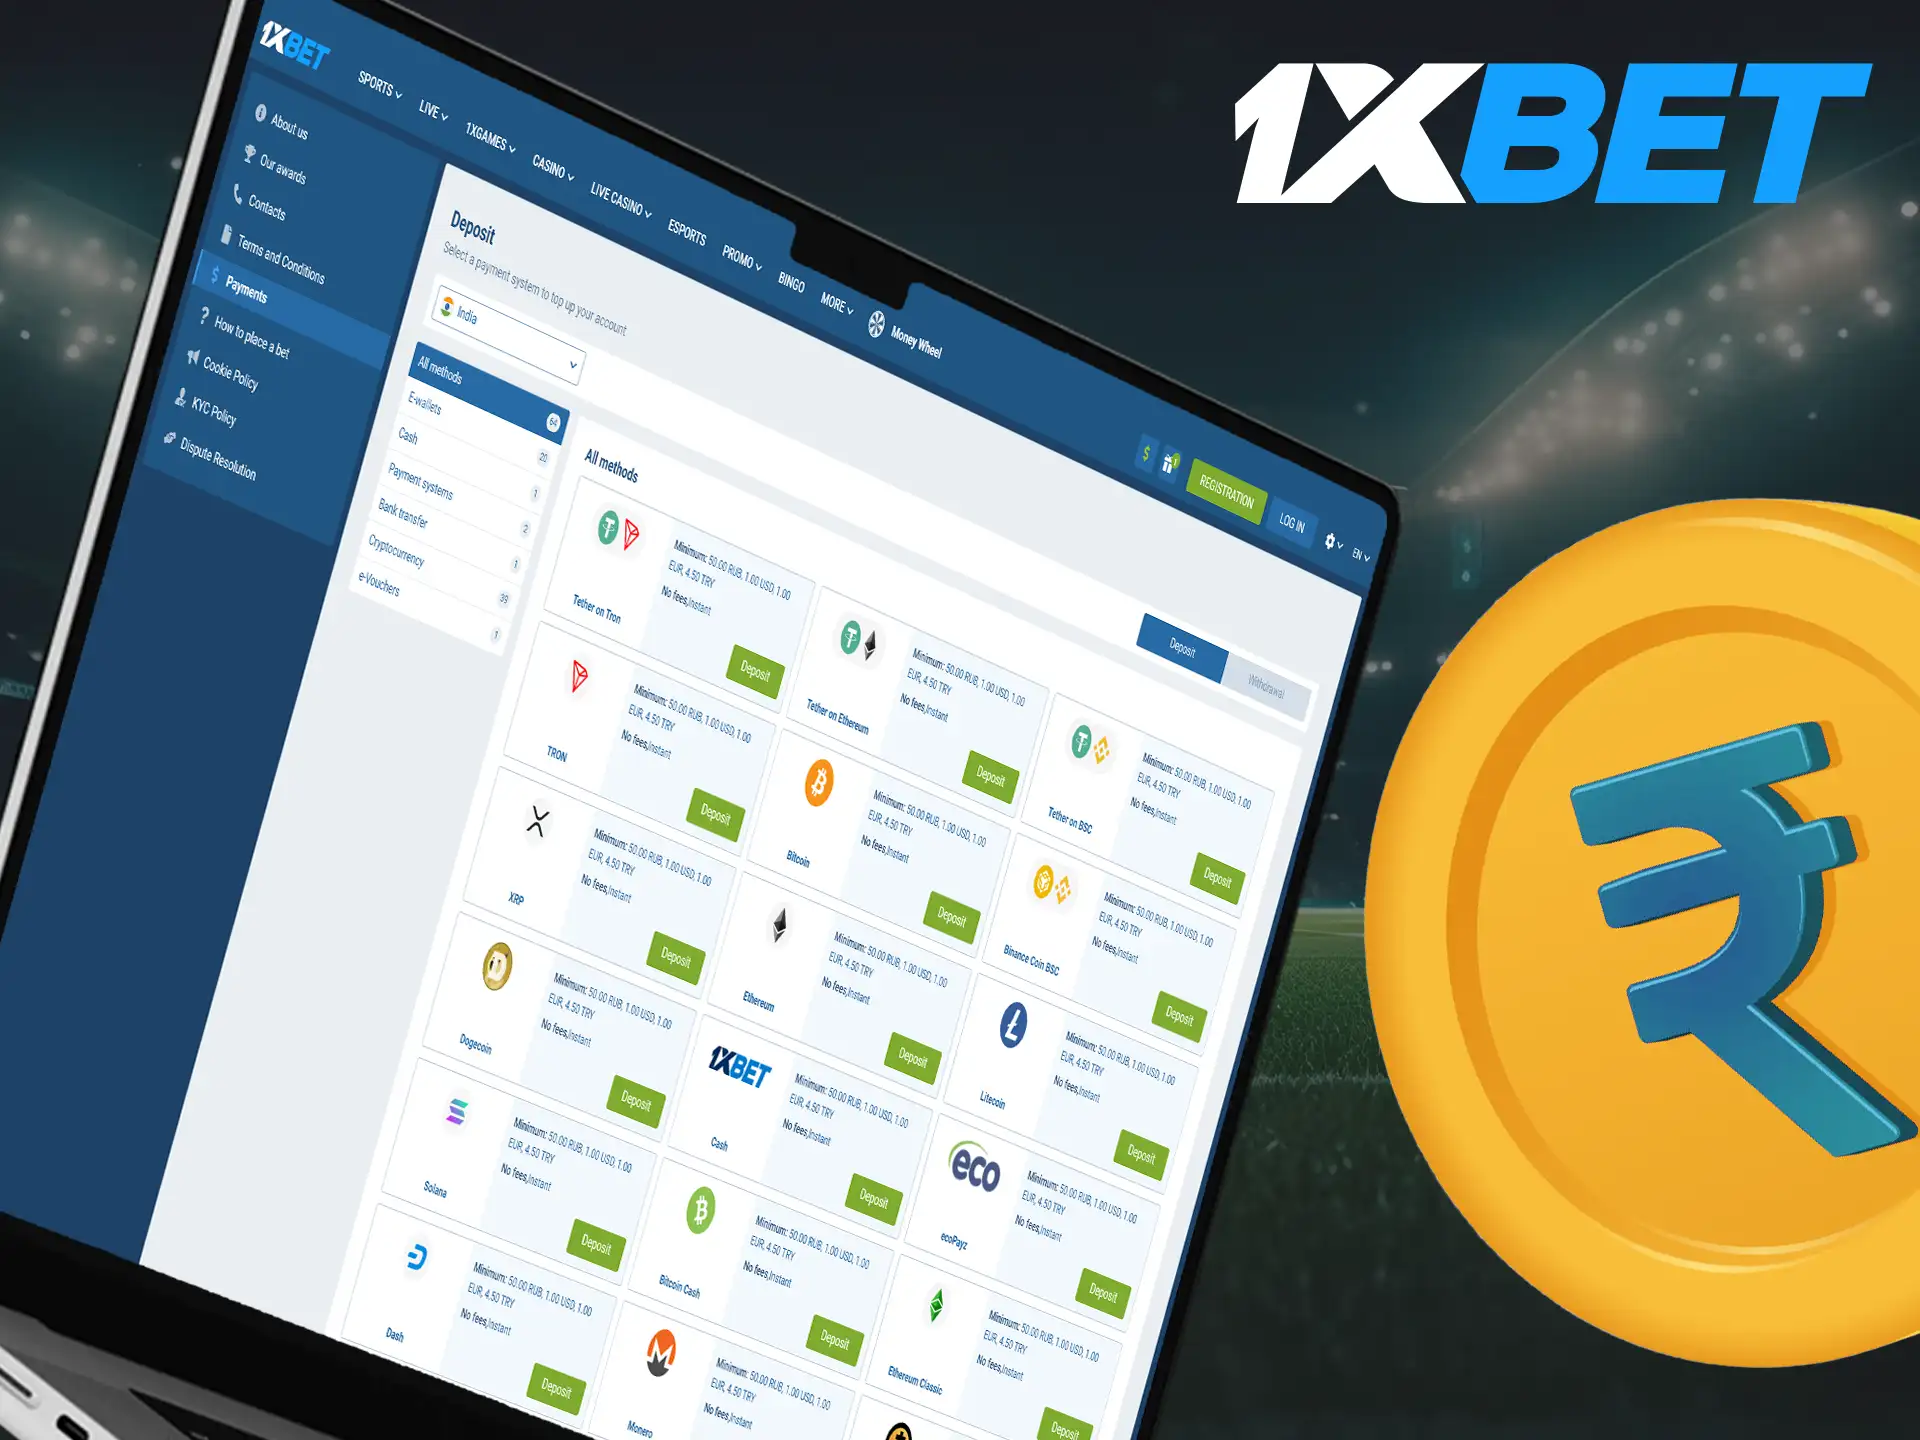 Find out how to deposit funds into your account at 1xBet official website and start betting.